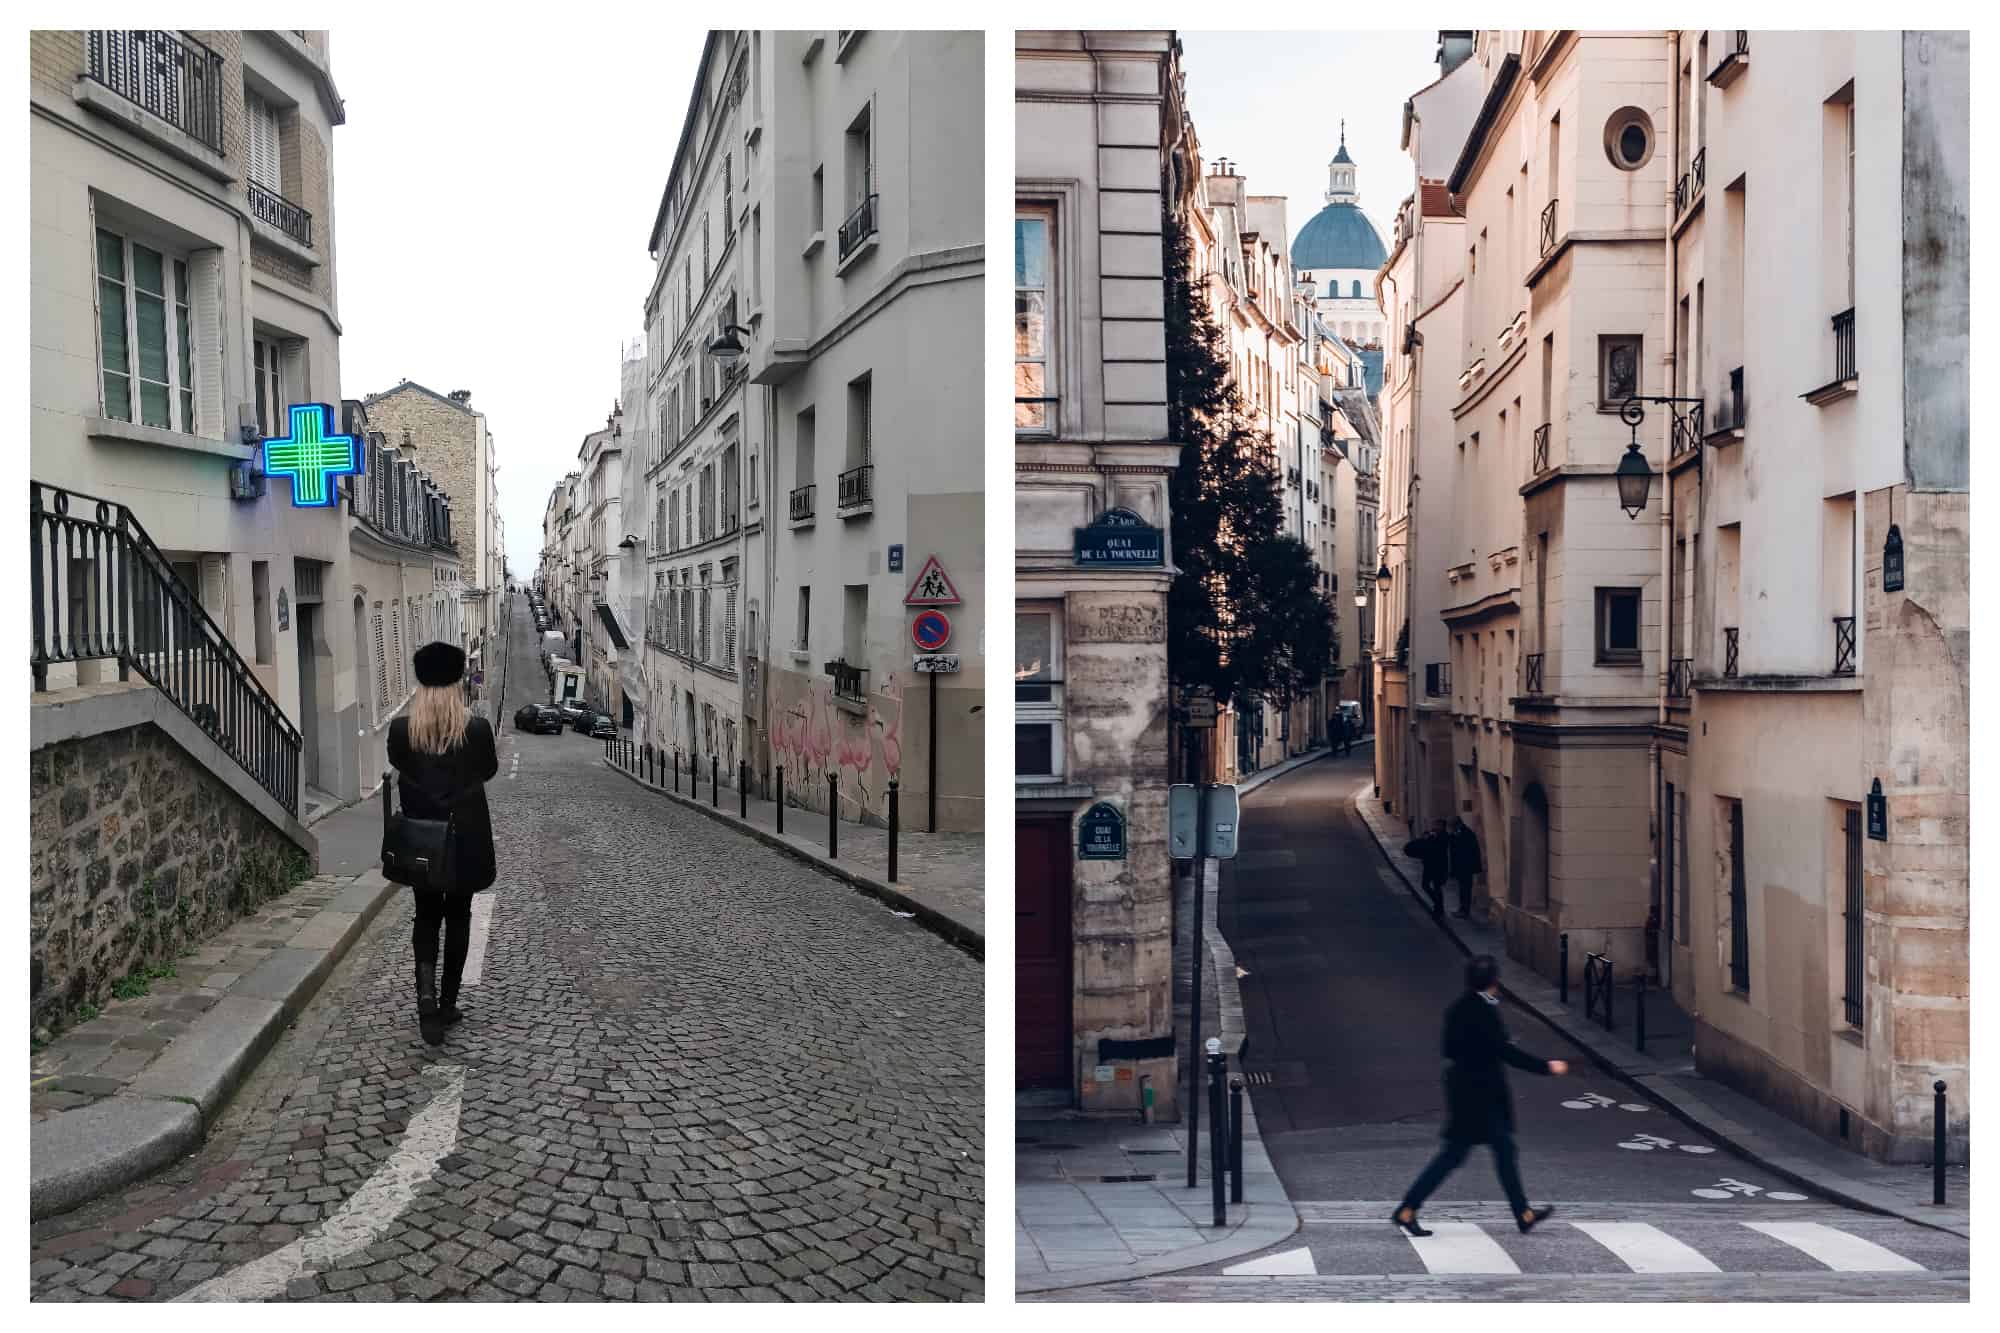 On the left: A blonde-haired woman, dressed in a classic black outfit, walks down a cobbled sweet in Paris, past a pharmacy and mural of pink flamingos. On the right: A man crosses the street in the Latin Quarter of Paris, the dome of the Pantheon visible in the background. 